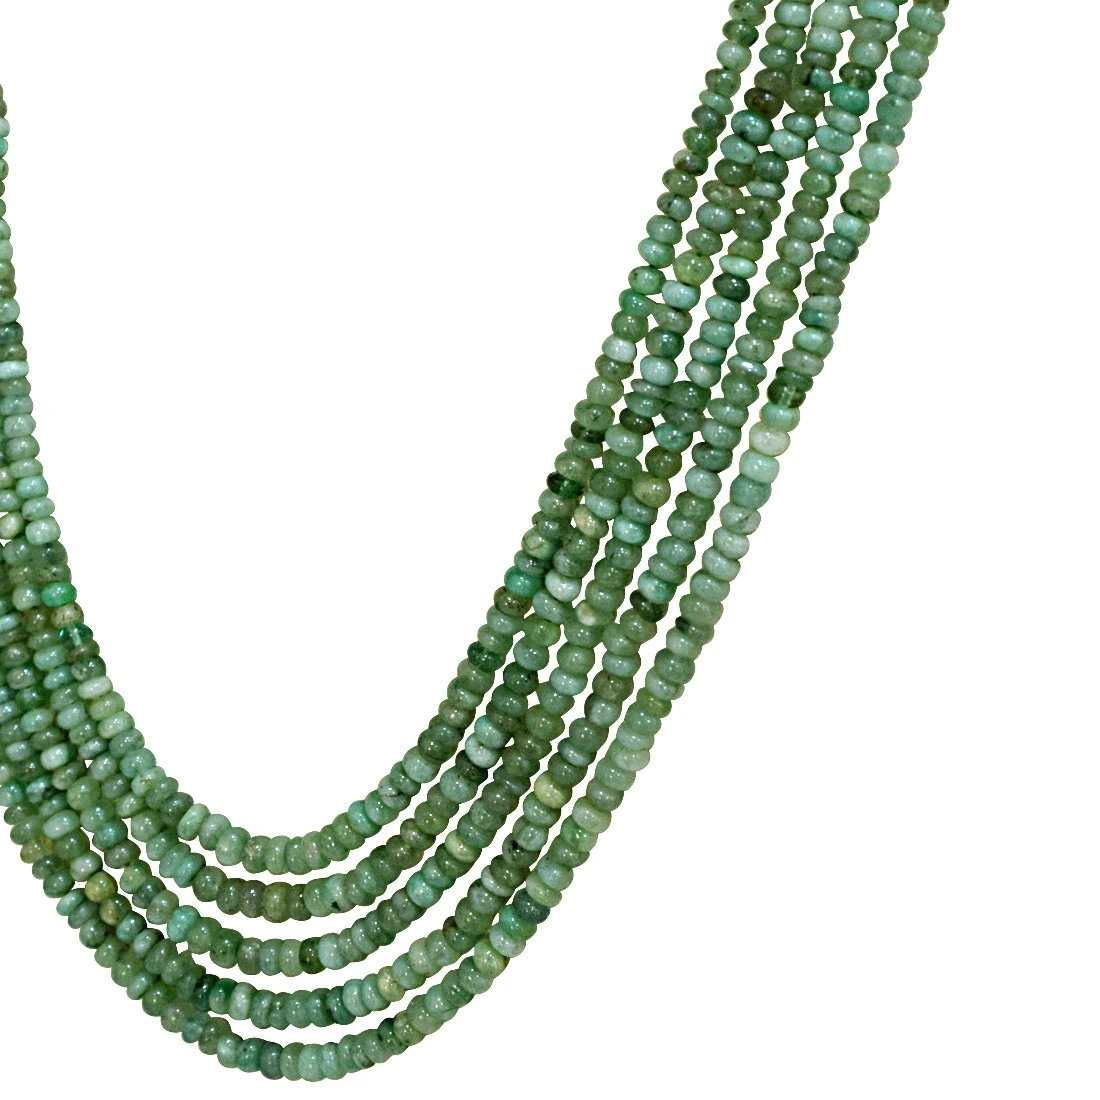 Details about   BEST QUALITY RARE 179.25 CTS NATURAL UNTREATED GREEN EMERALD OVAL BEADS NECKLACE 